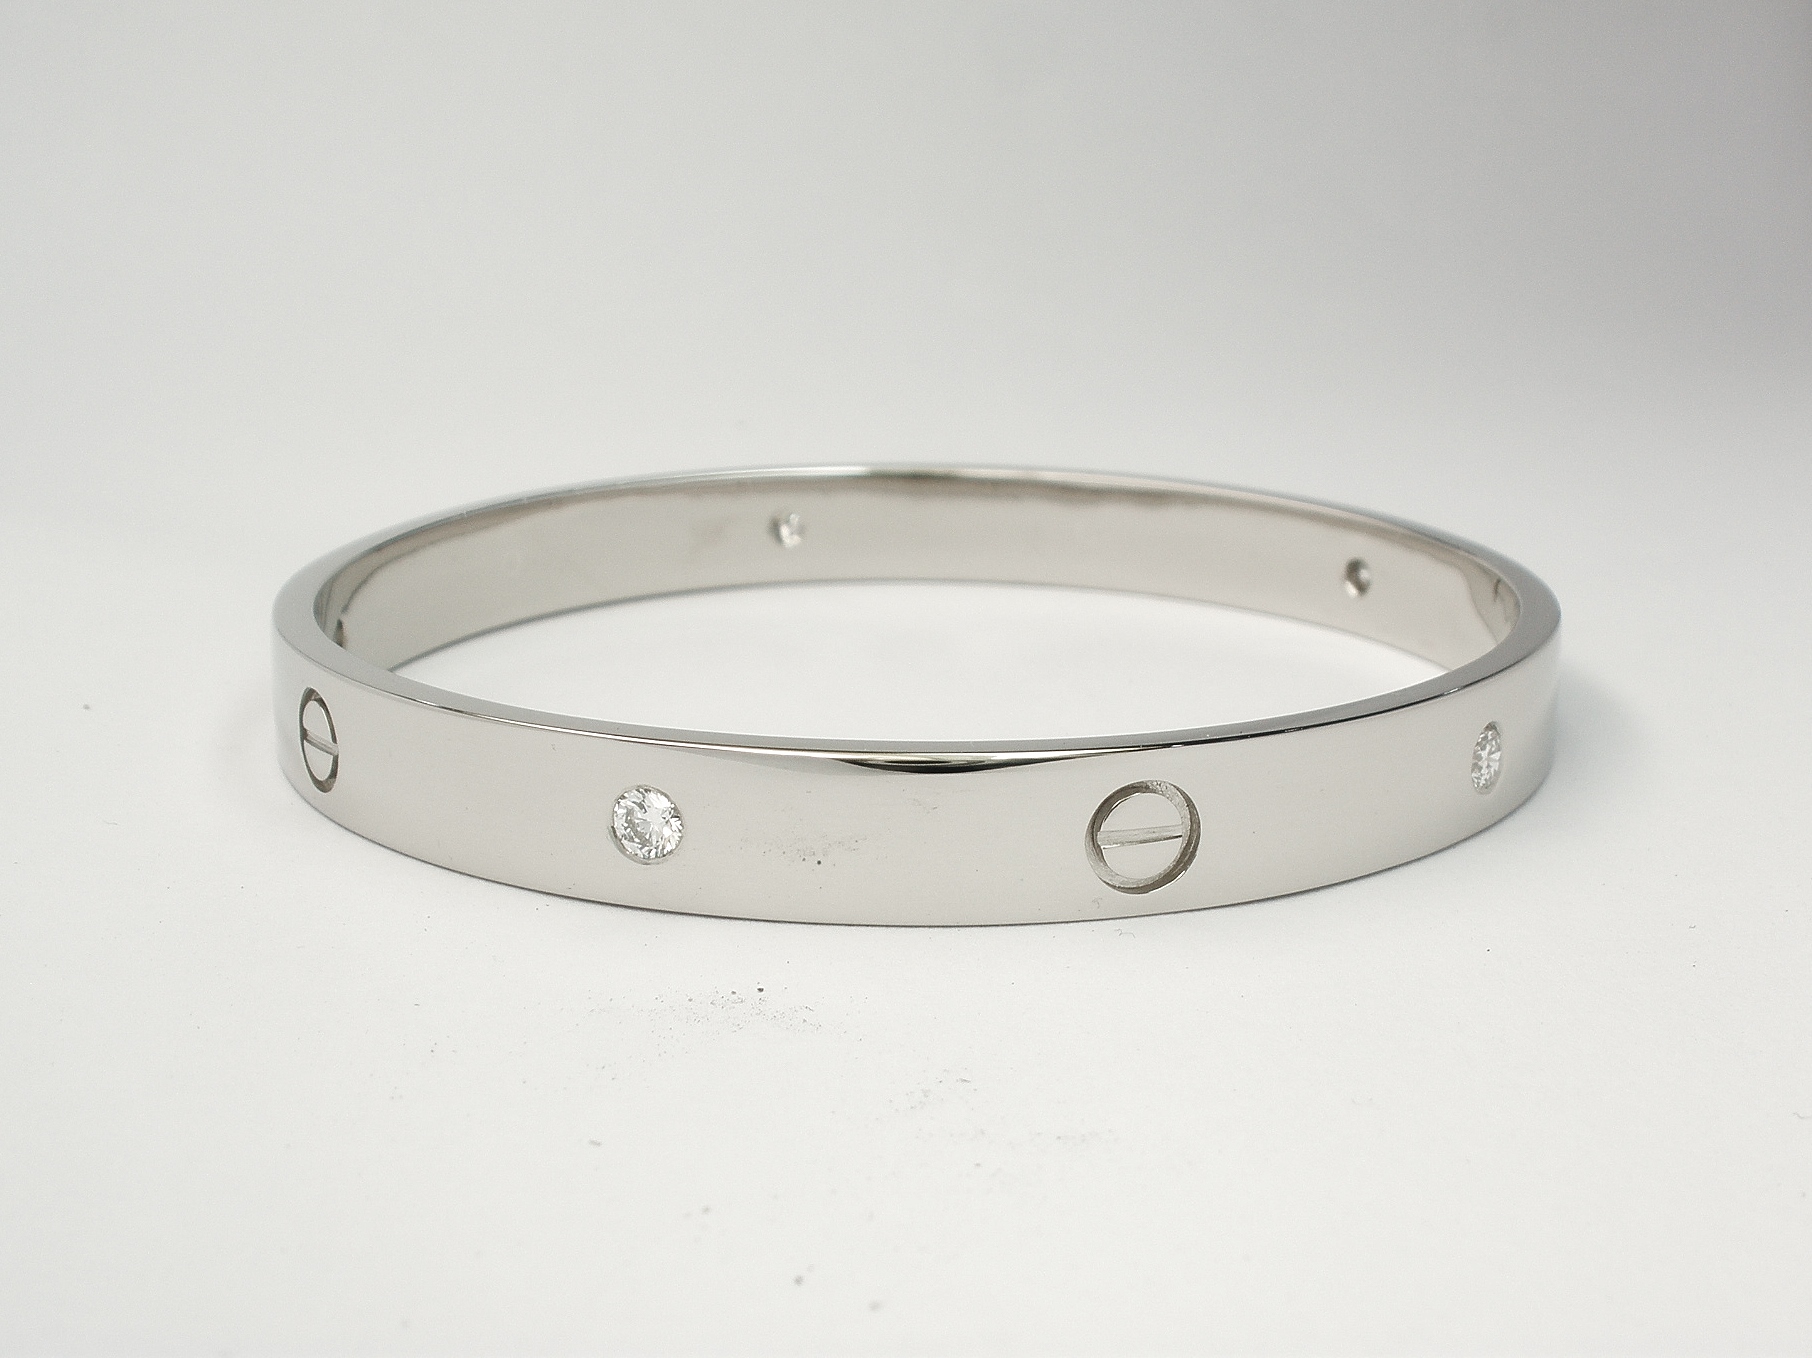 Palladium heavy sectioned bangle flush set with round brilliant cut diamonds and recessed screw heads.